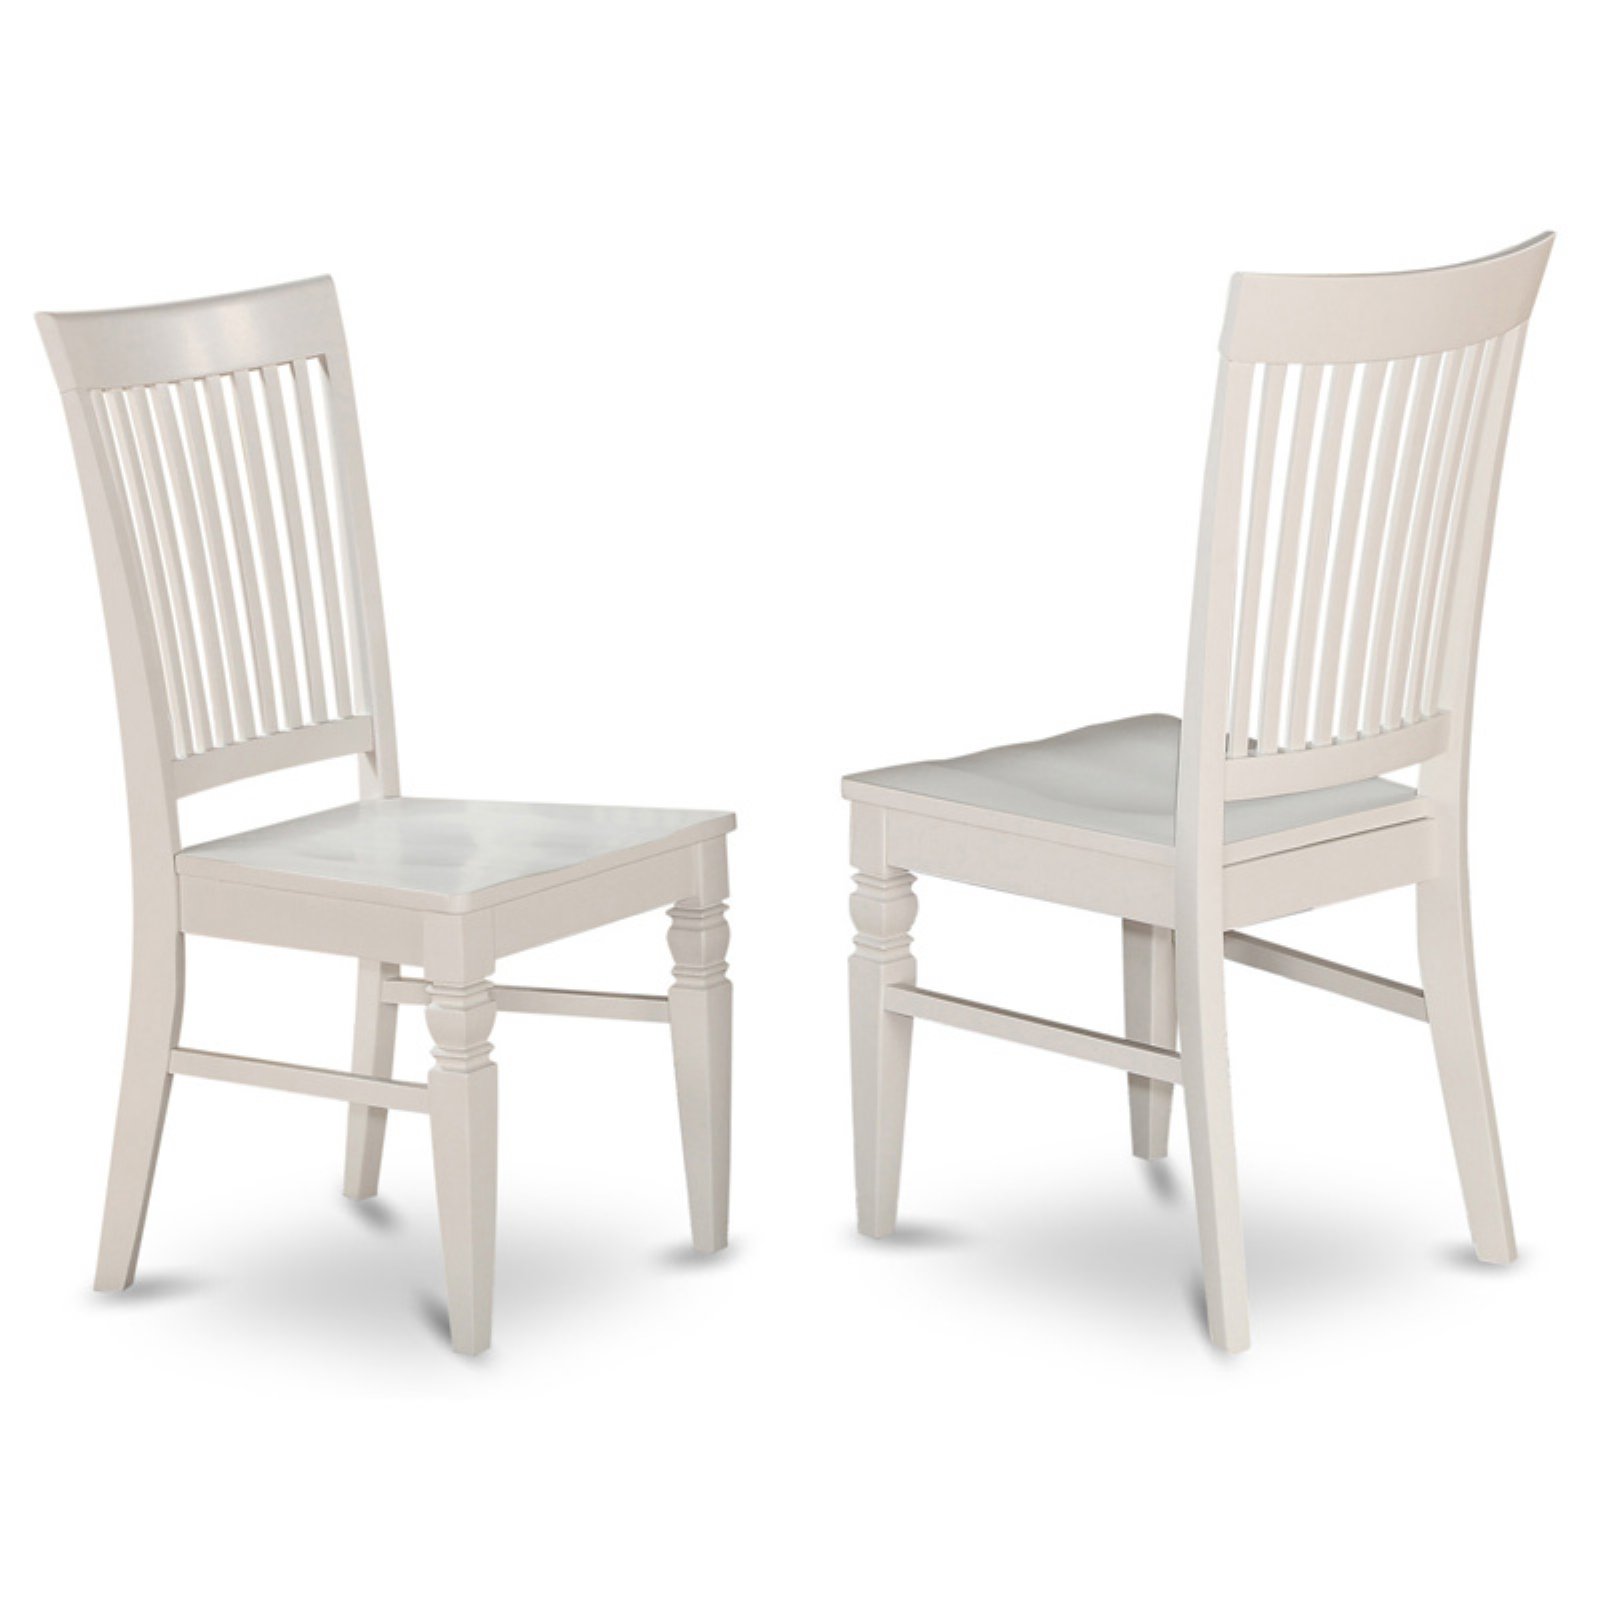 East West Furniture Capri 5-piece Wood Dining Set with Solid Tabletop in White - image 3 of 5